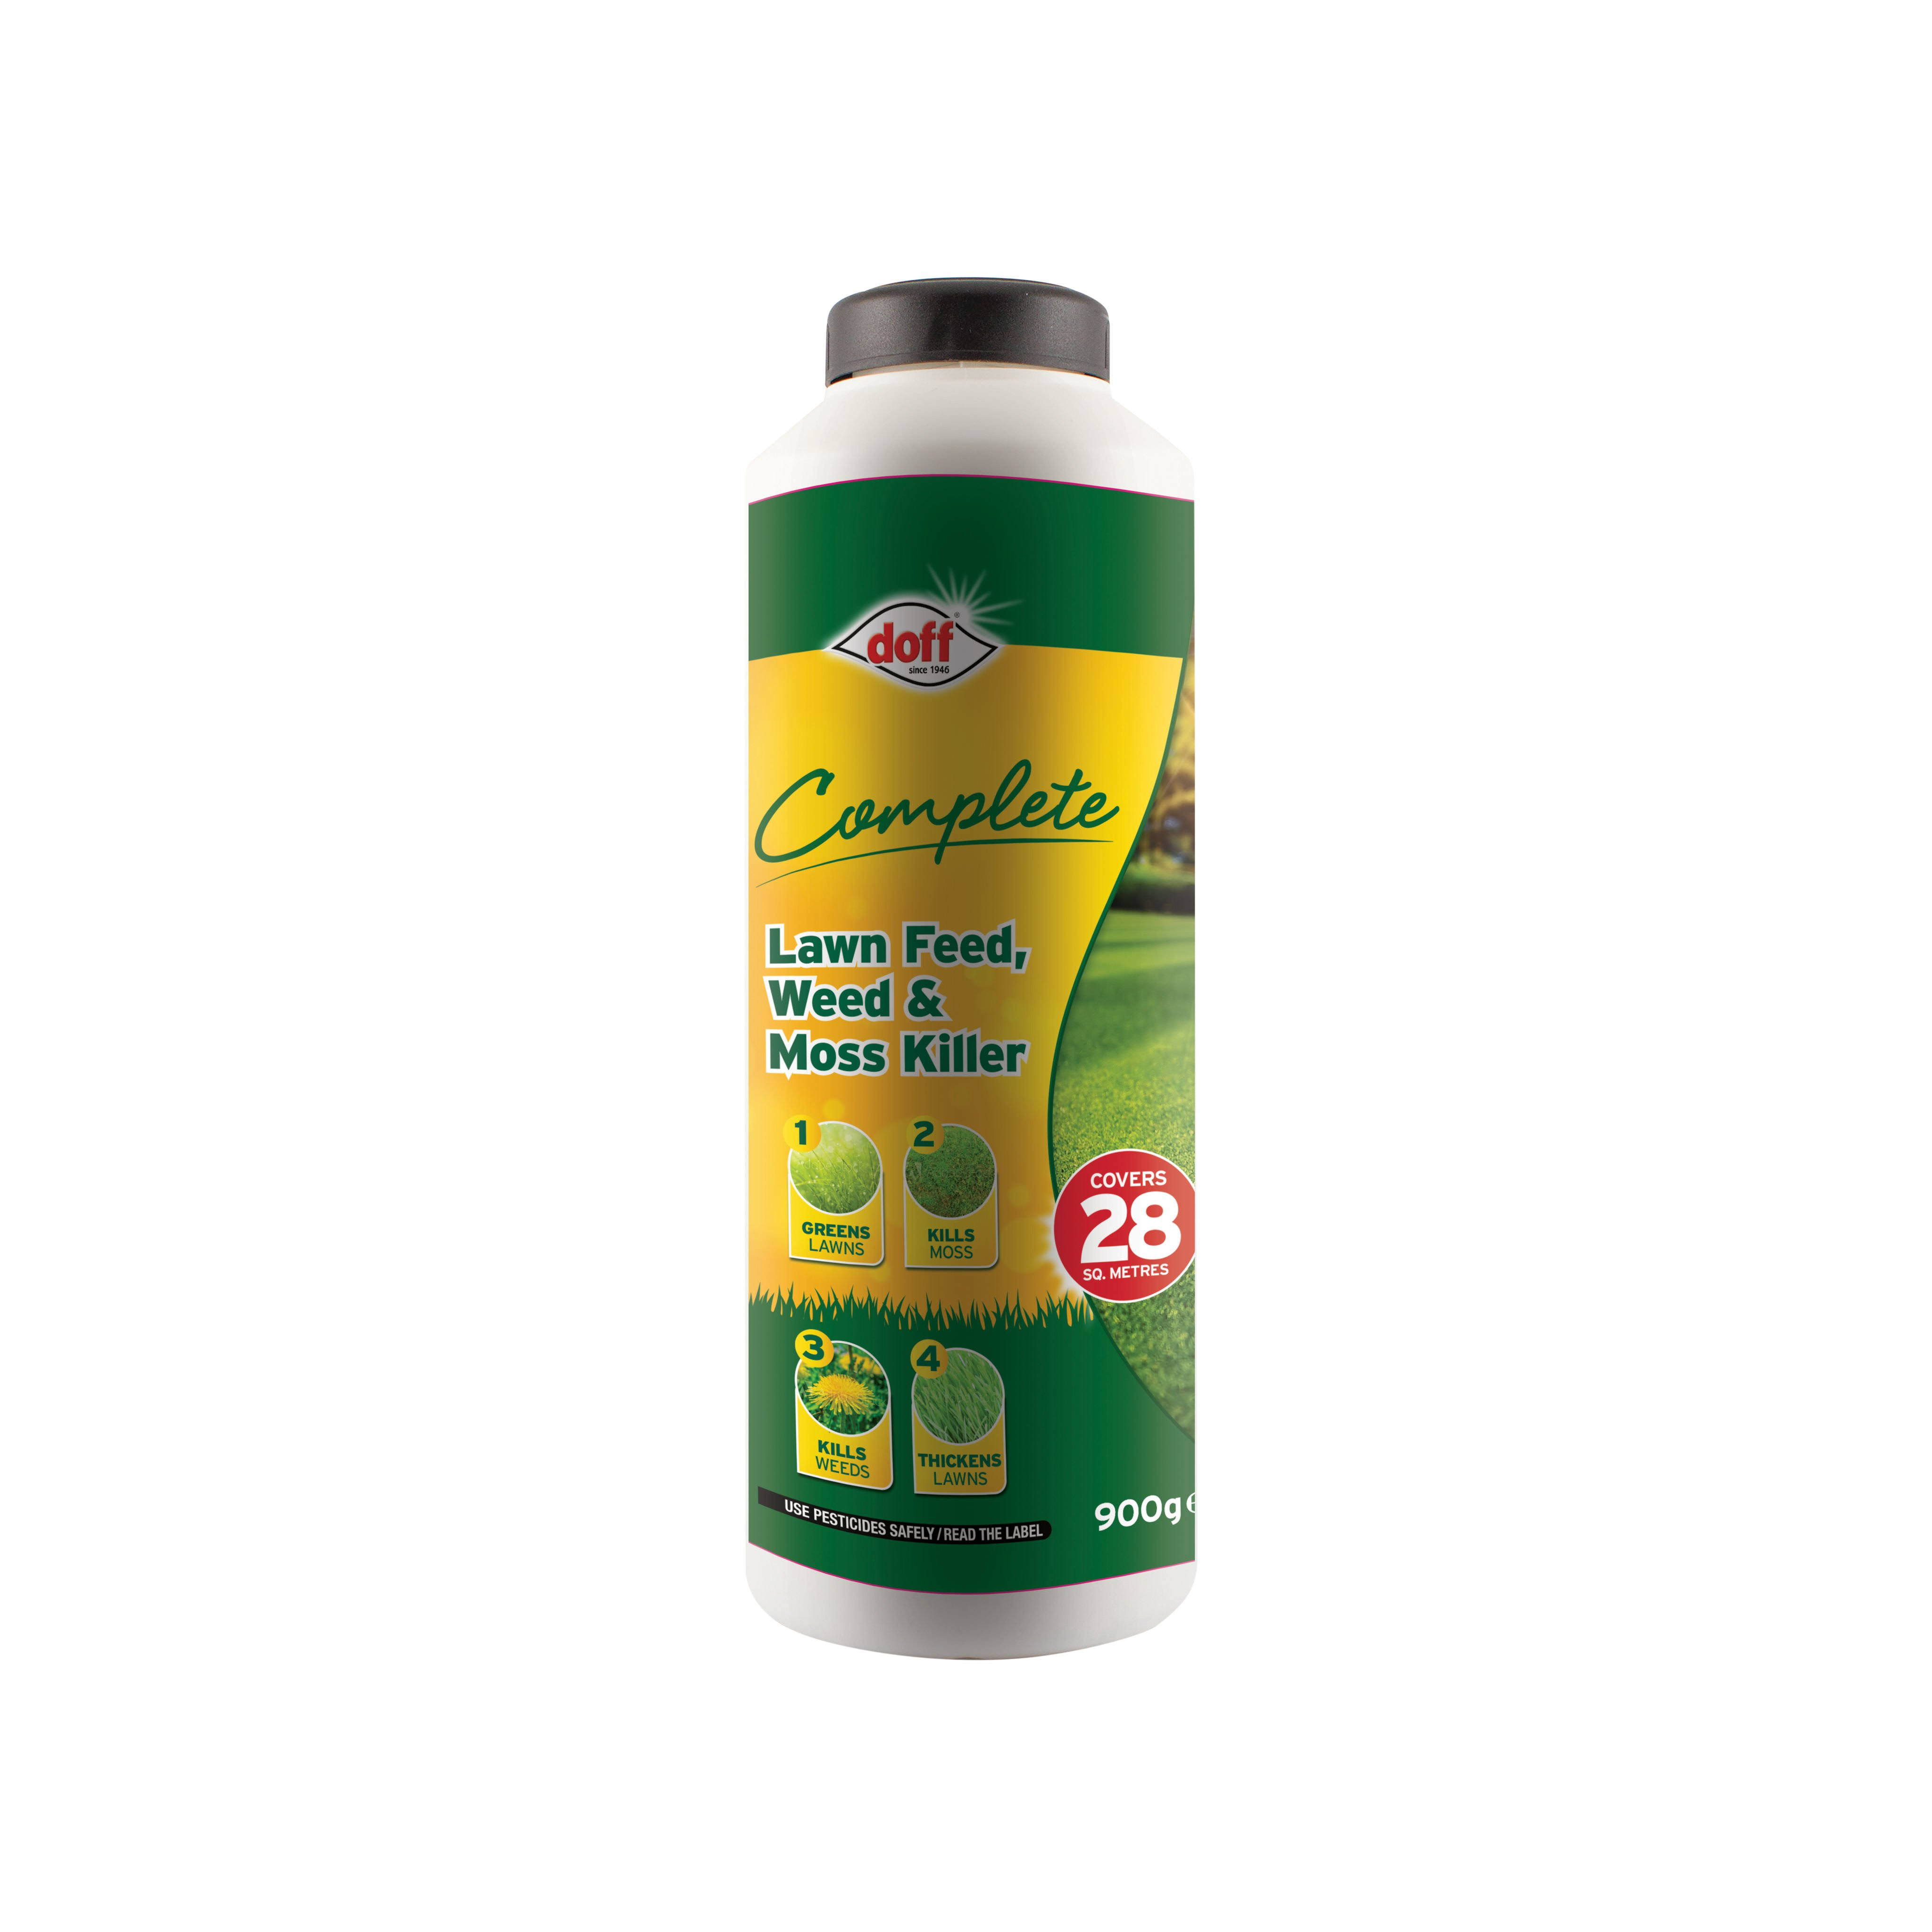 Doff Complete Lawn Feed Weed & Moss Killer 1kg F-LM-030-DOF-01